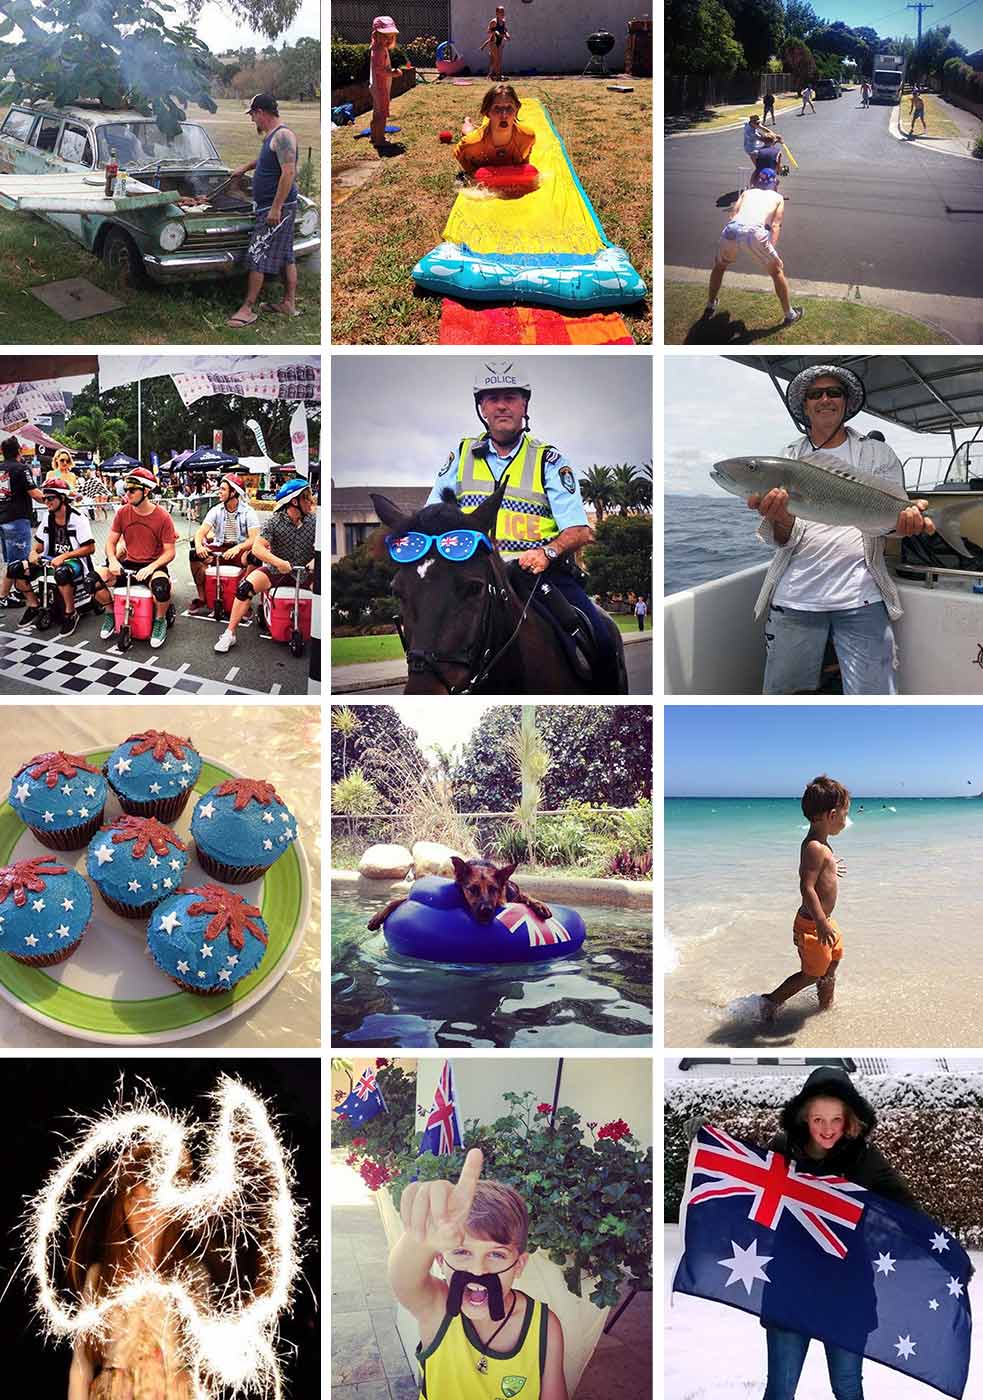 Some of the thousands of images tweeted by Australians and curated by the Museum, 26 January 2014.